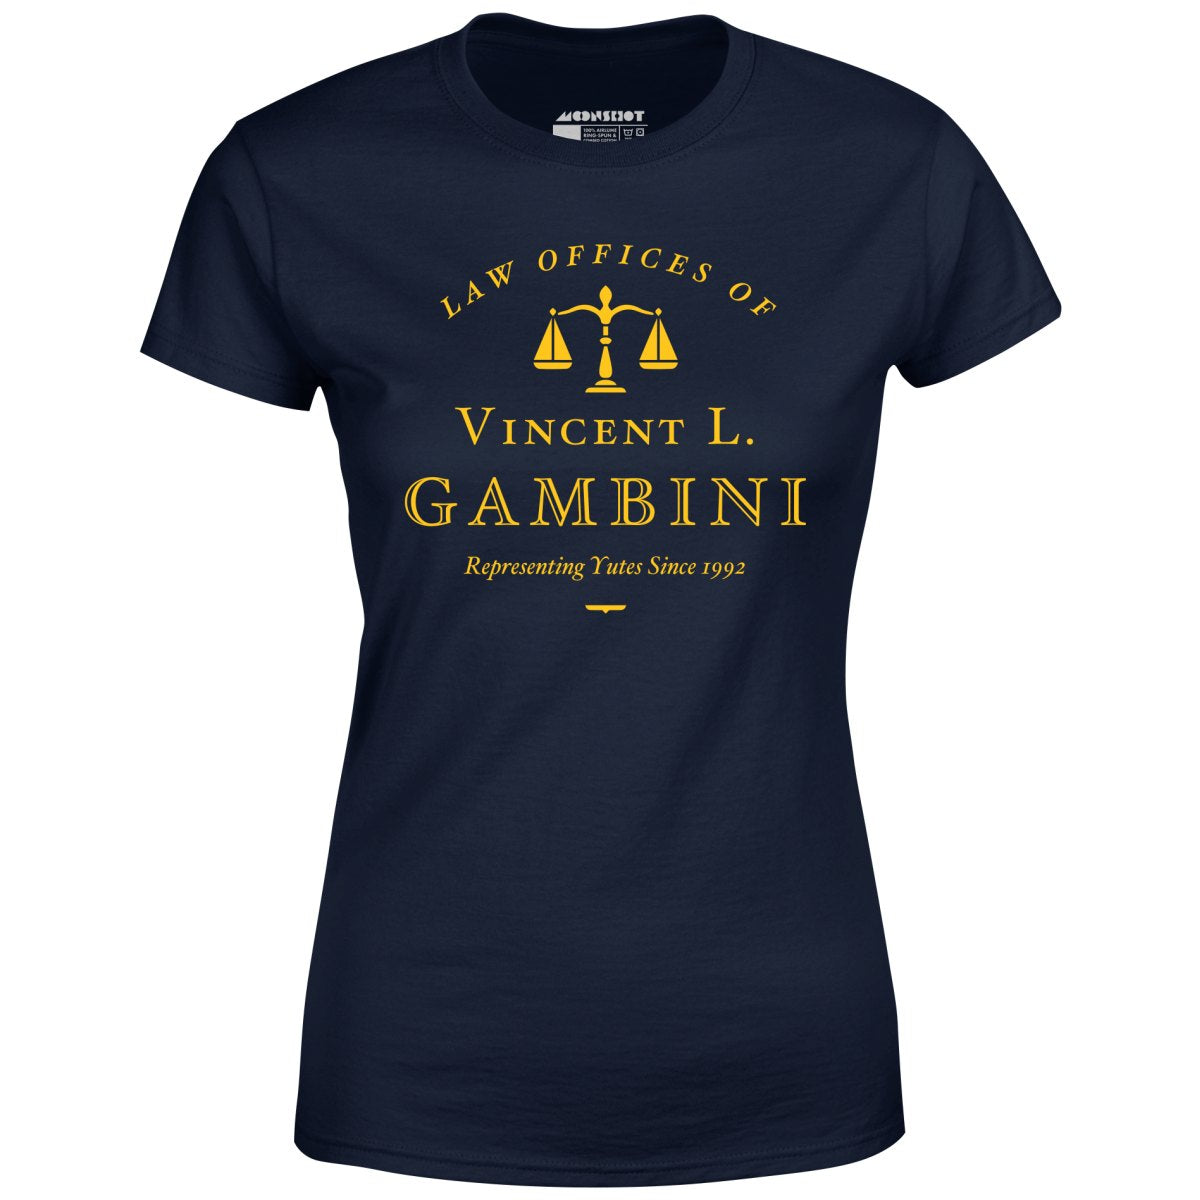 Law Offices of Vincent L. Gambini - Women's T-Shirt